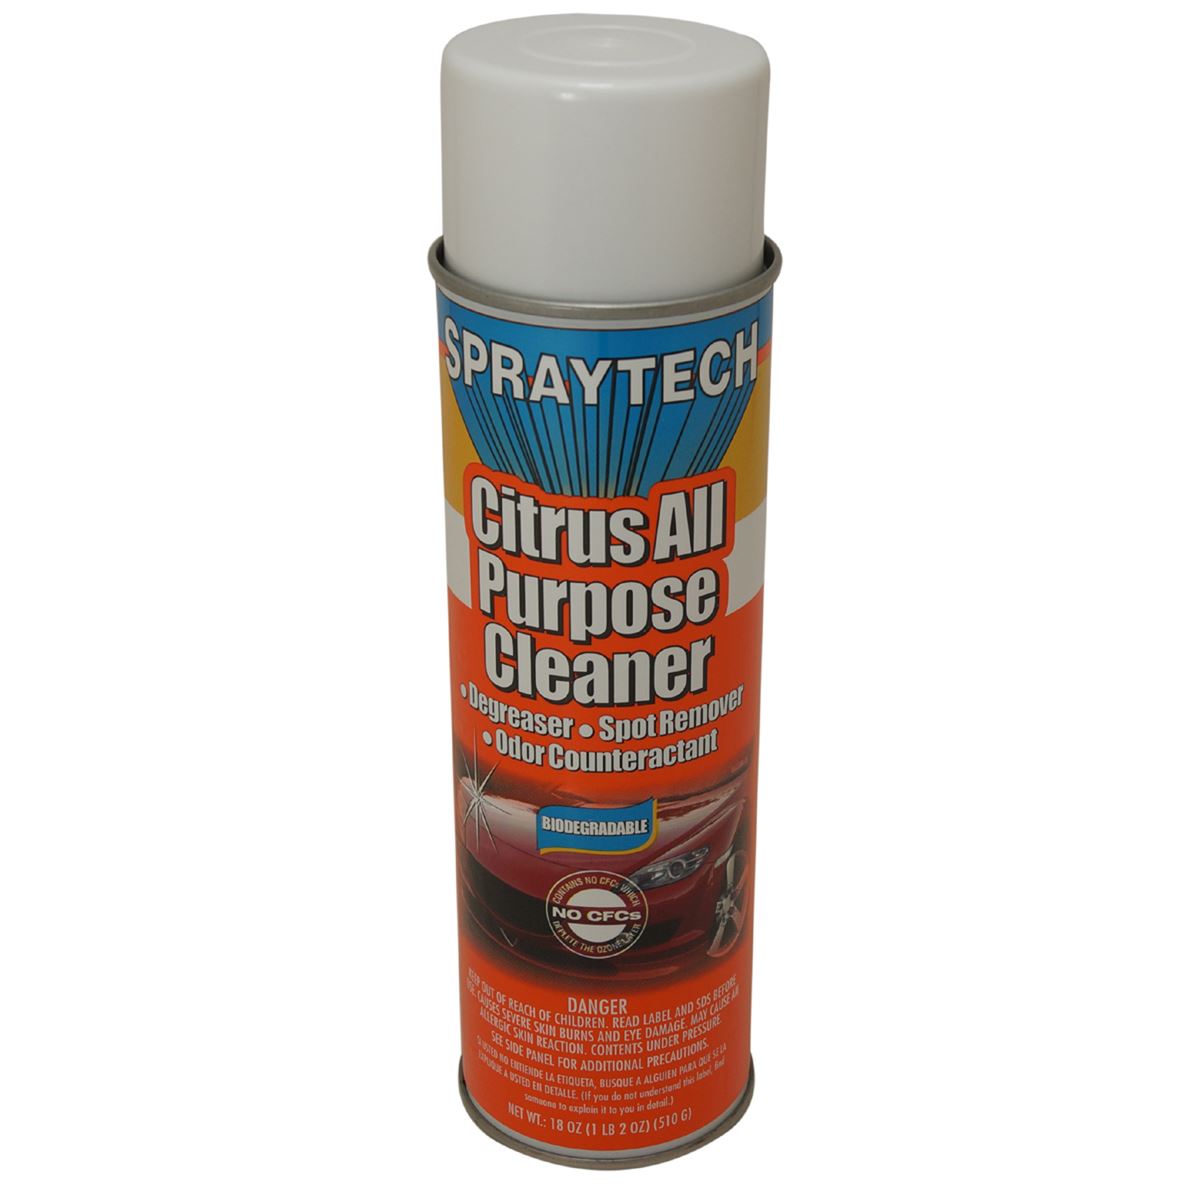 CITRUS ALL PURPOSE CLEANER. Professional Detailing Products, Because Your  Car is a Reflection of You